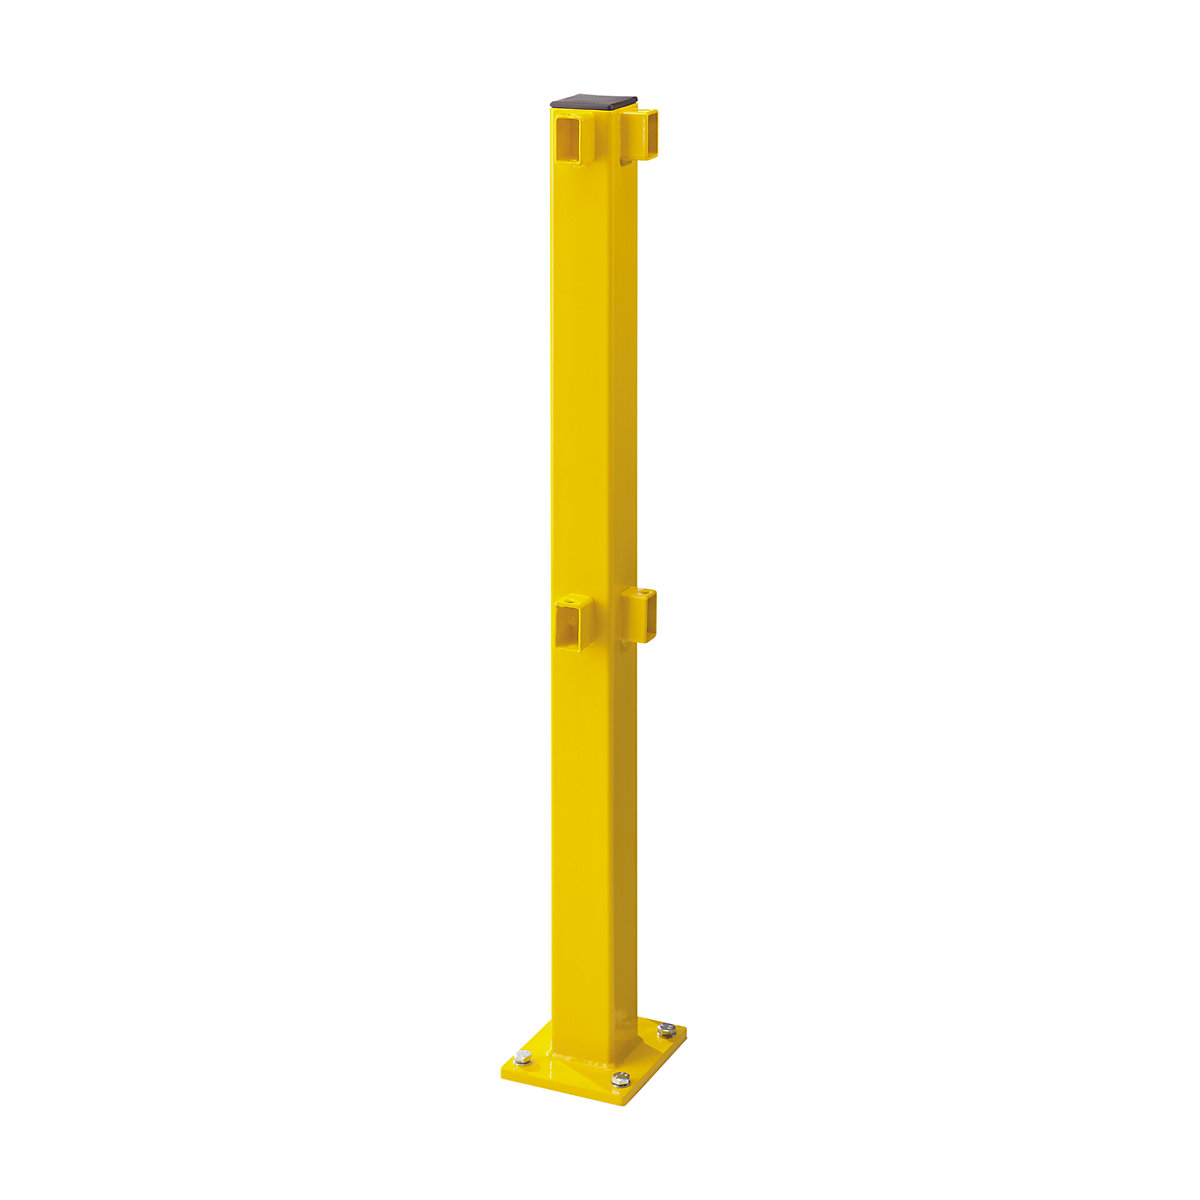 S-Line post for safety railing, for indoor areas, corner post-2